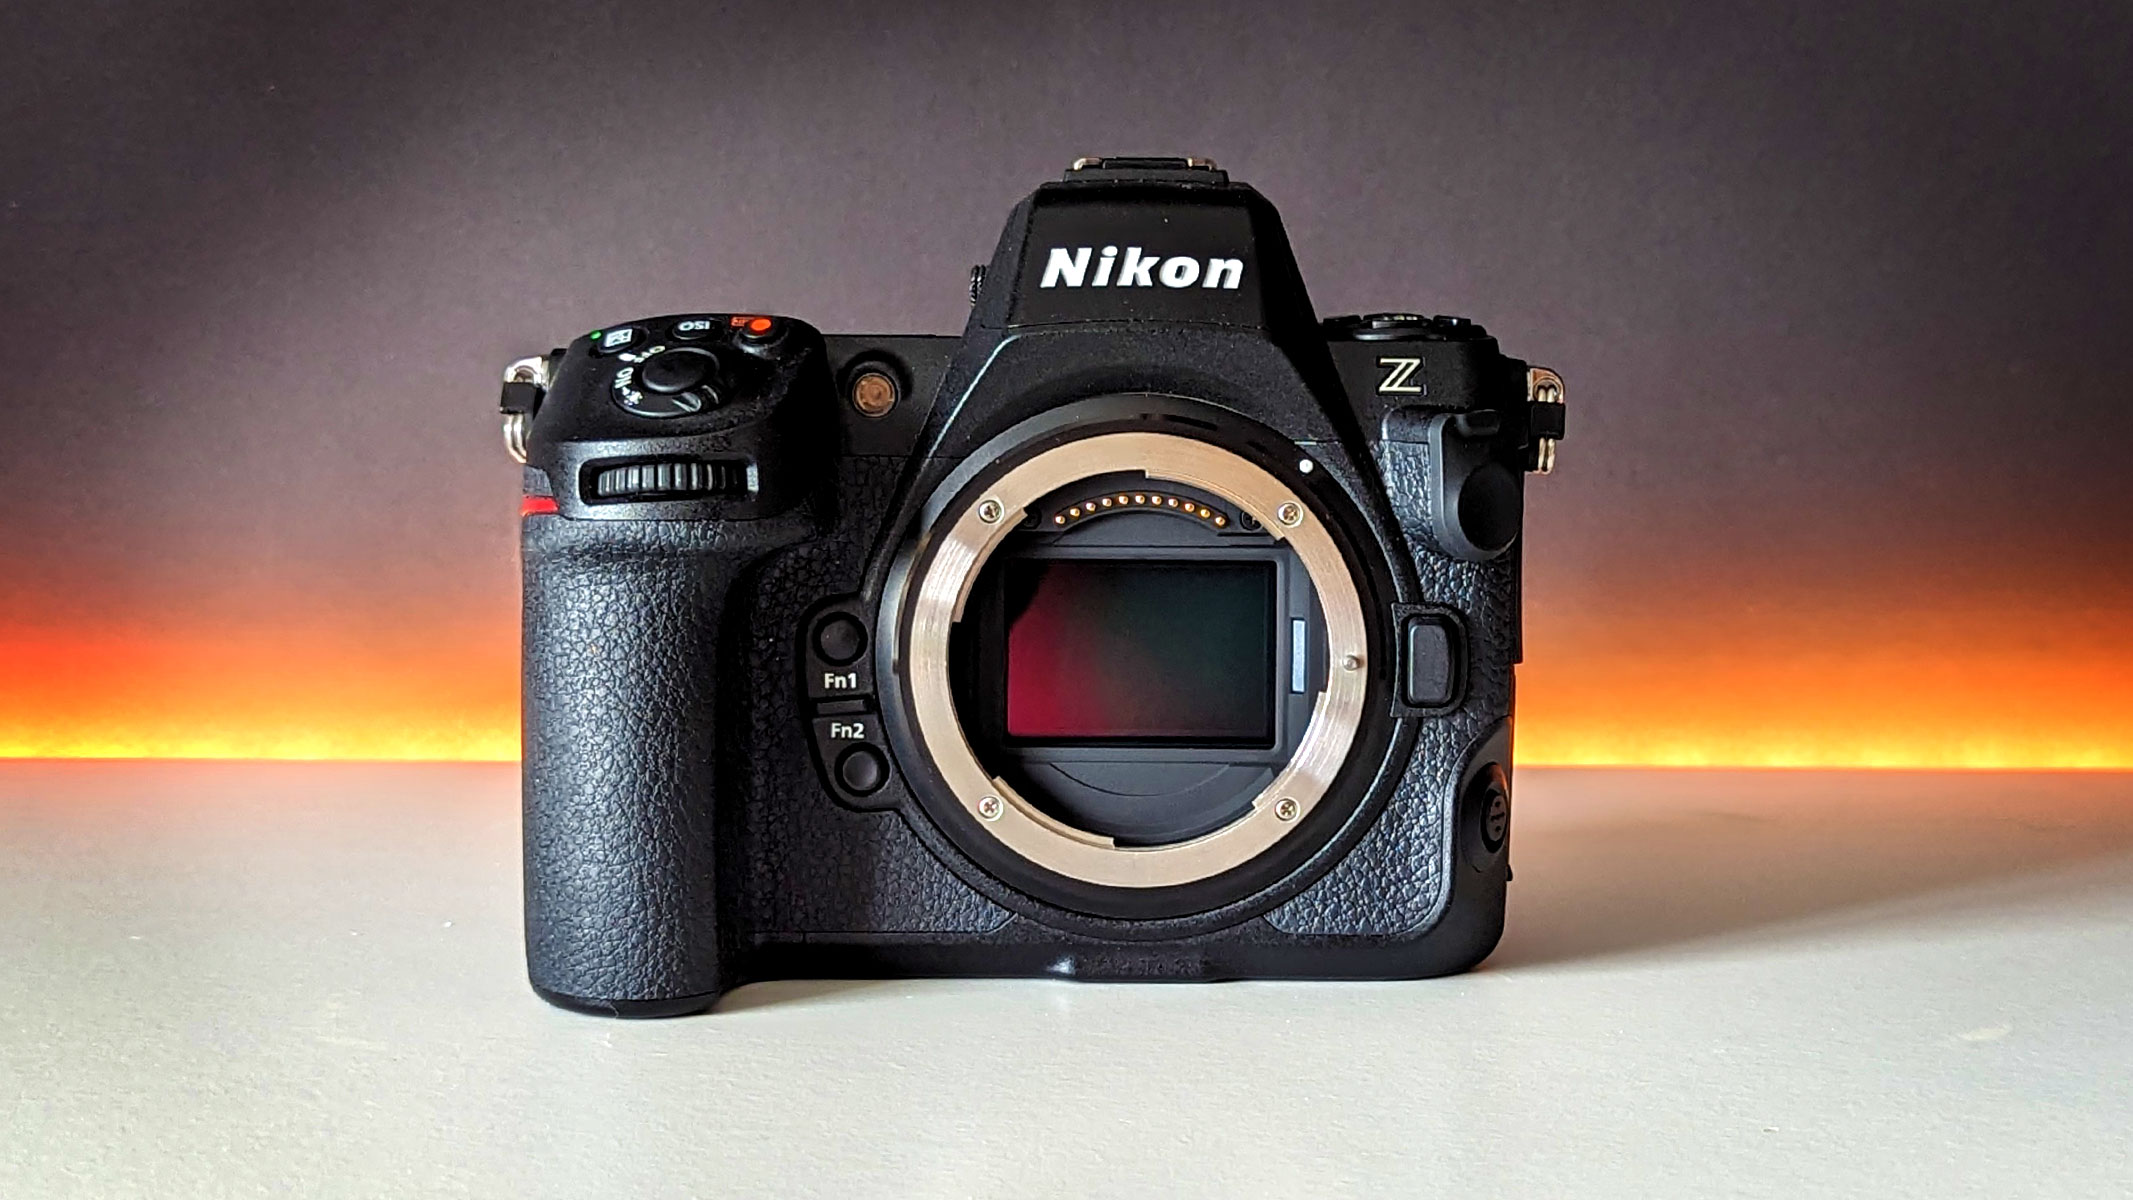 Why the Nikon D3400 is Great for Beginners - Focus Camera